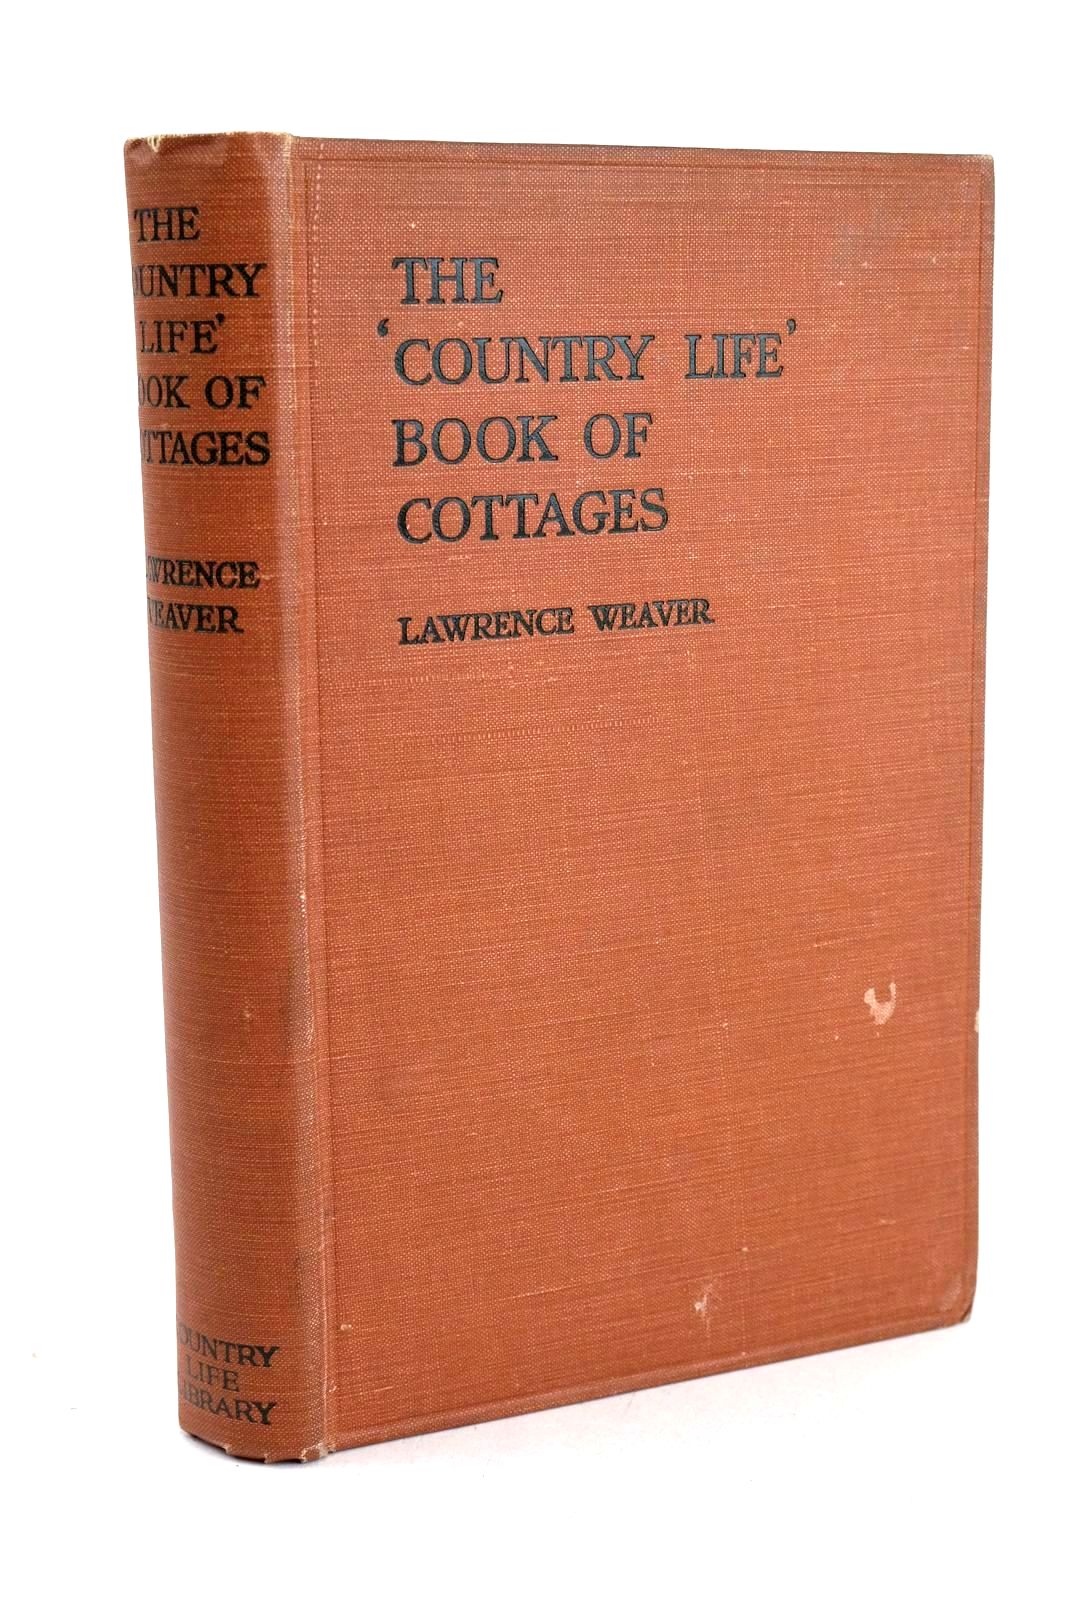 Photo of THE COUNTRY LIFE BOOK OF COTTAGES written by Weaver, Lawrence published by Country Life (STOCK CODE: 1326565)  for sale by Stella & Rose's Books